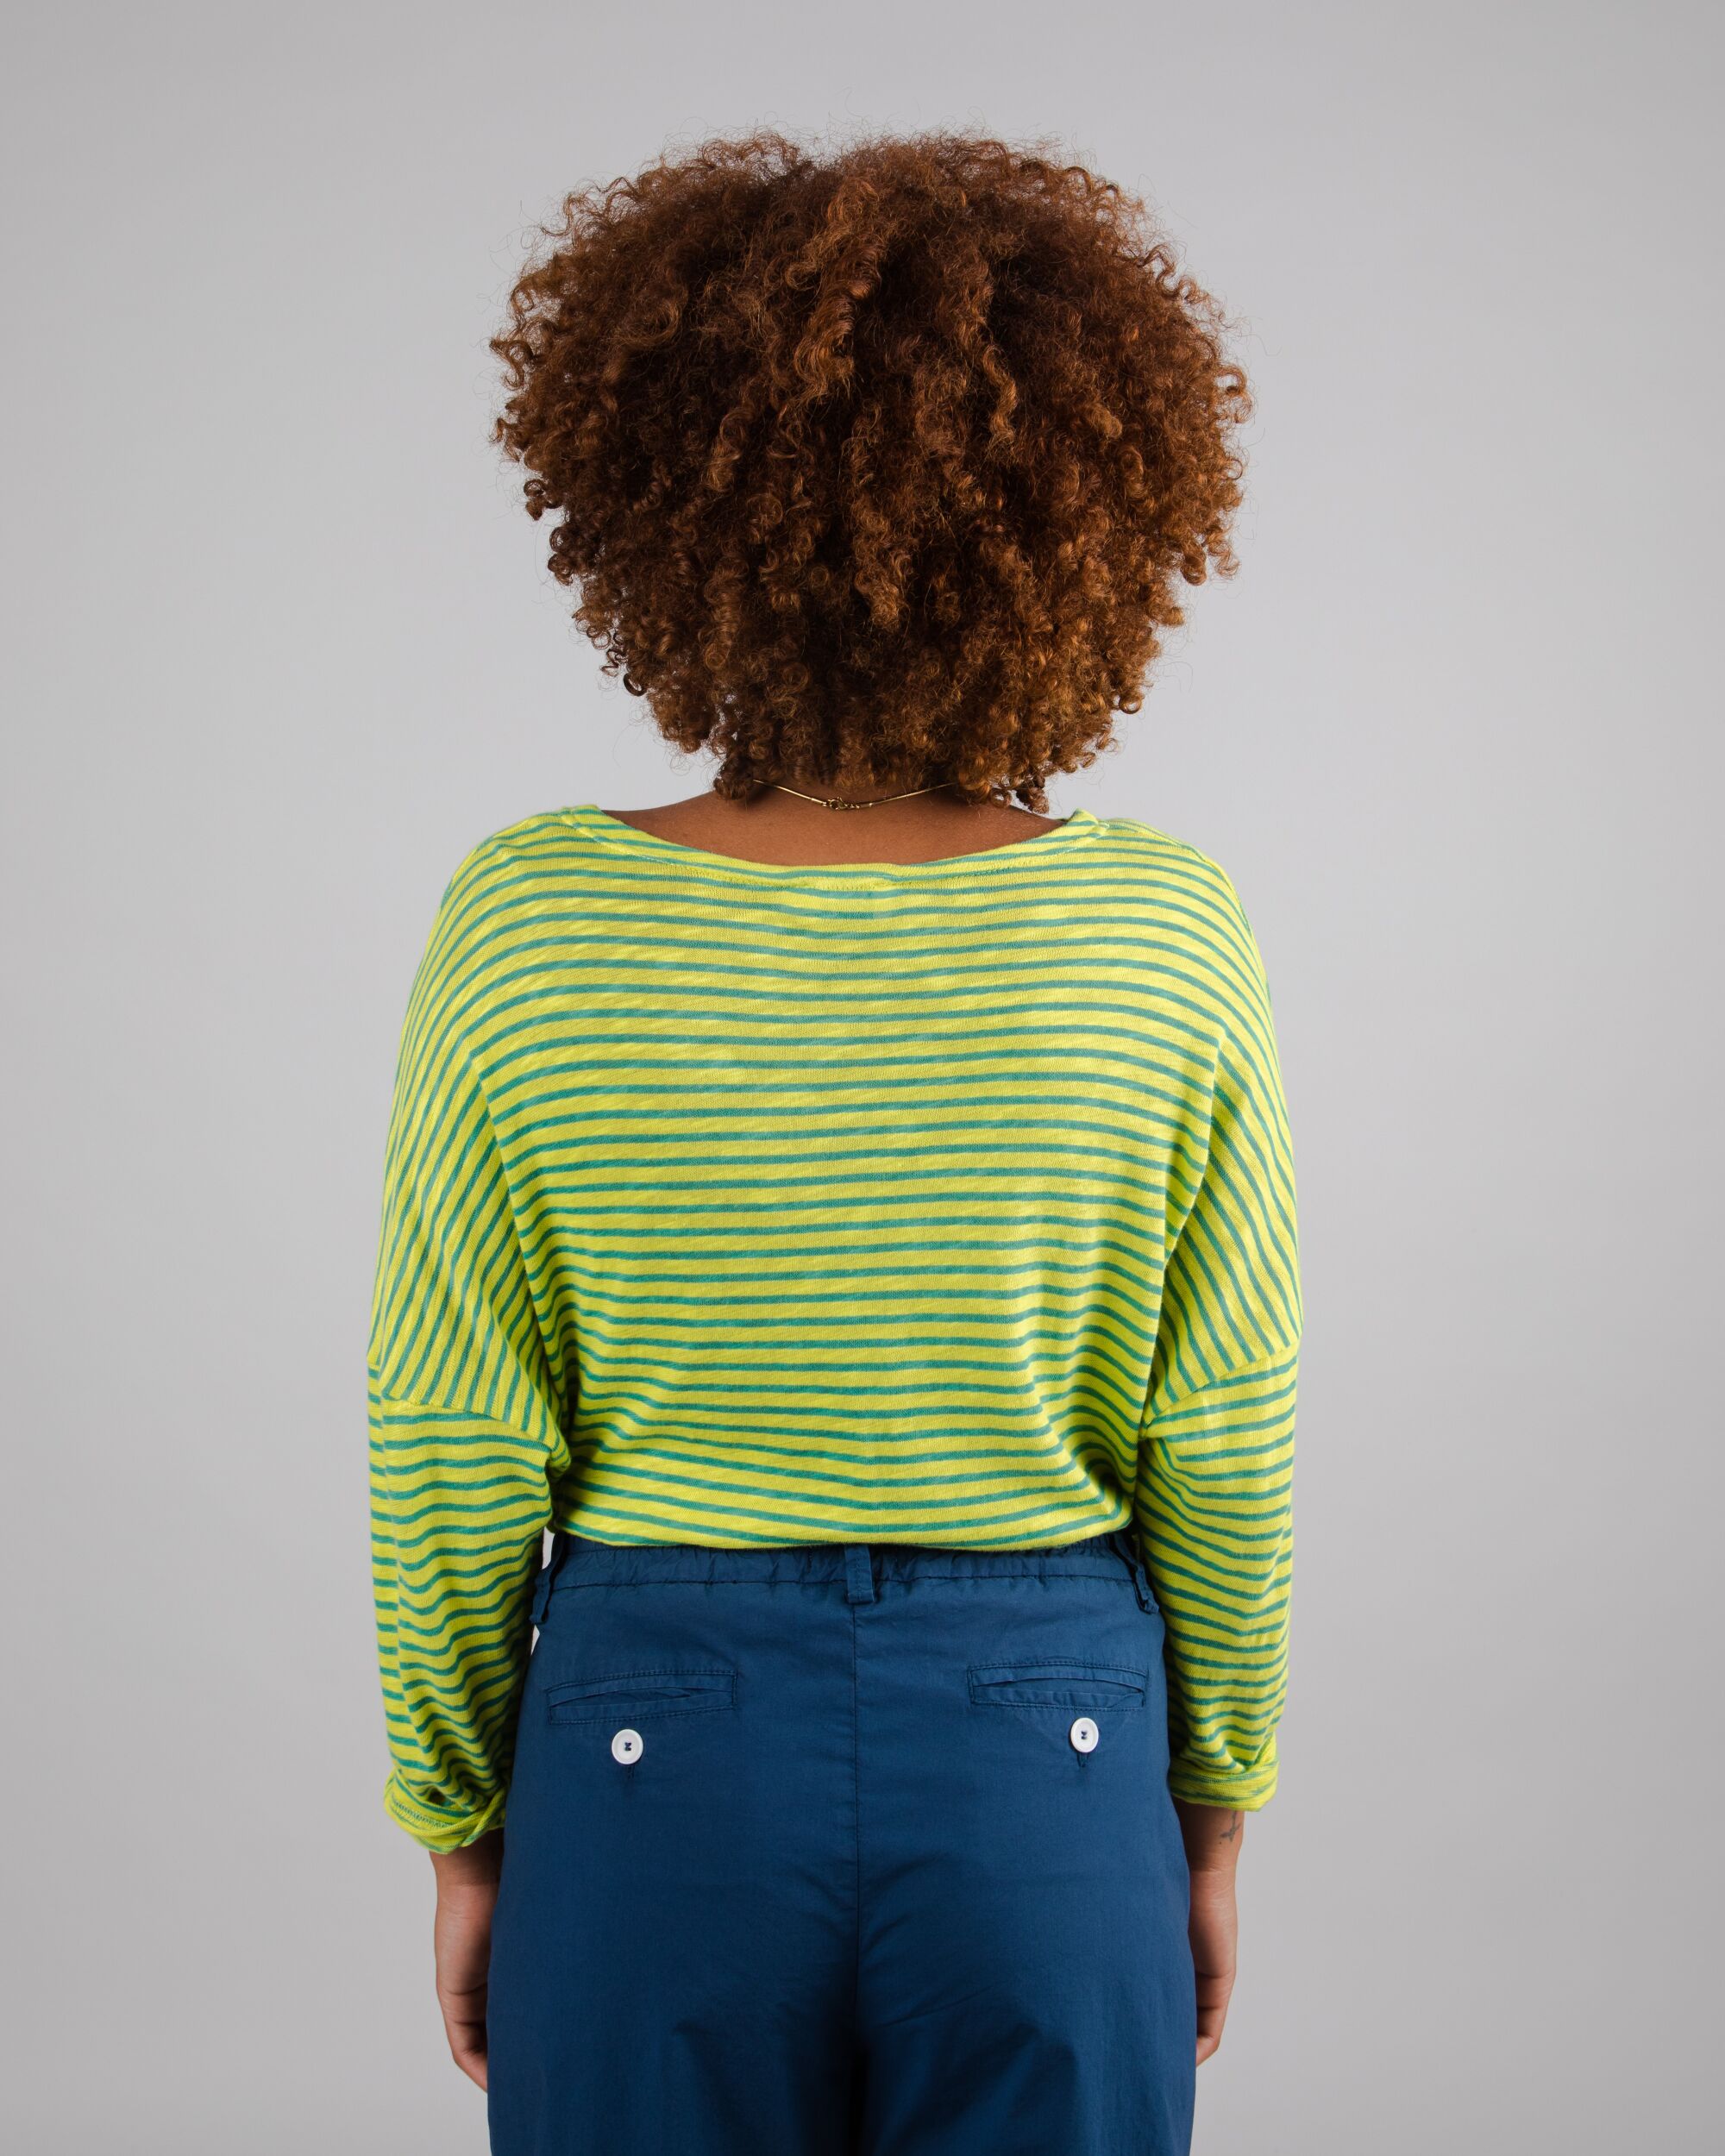 Sweatshirt Stripes Fine Knit Cotton in Lime made from organic cotton by Brava Fabrics